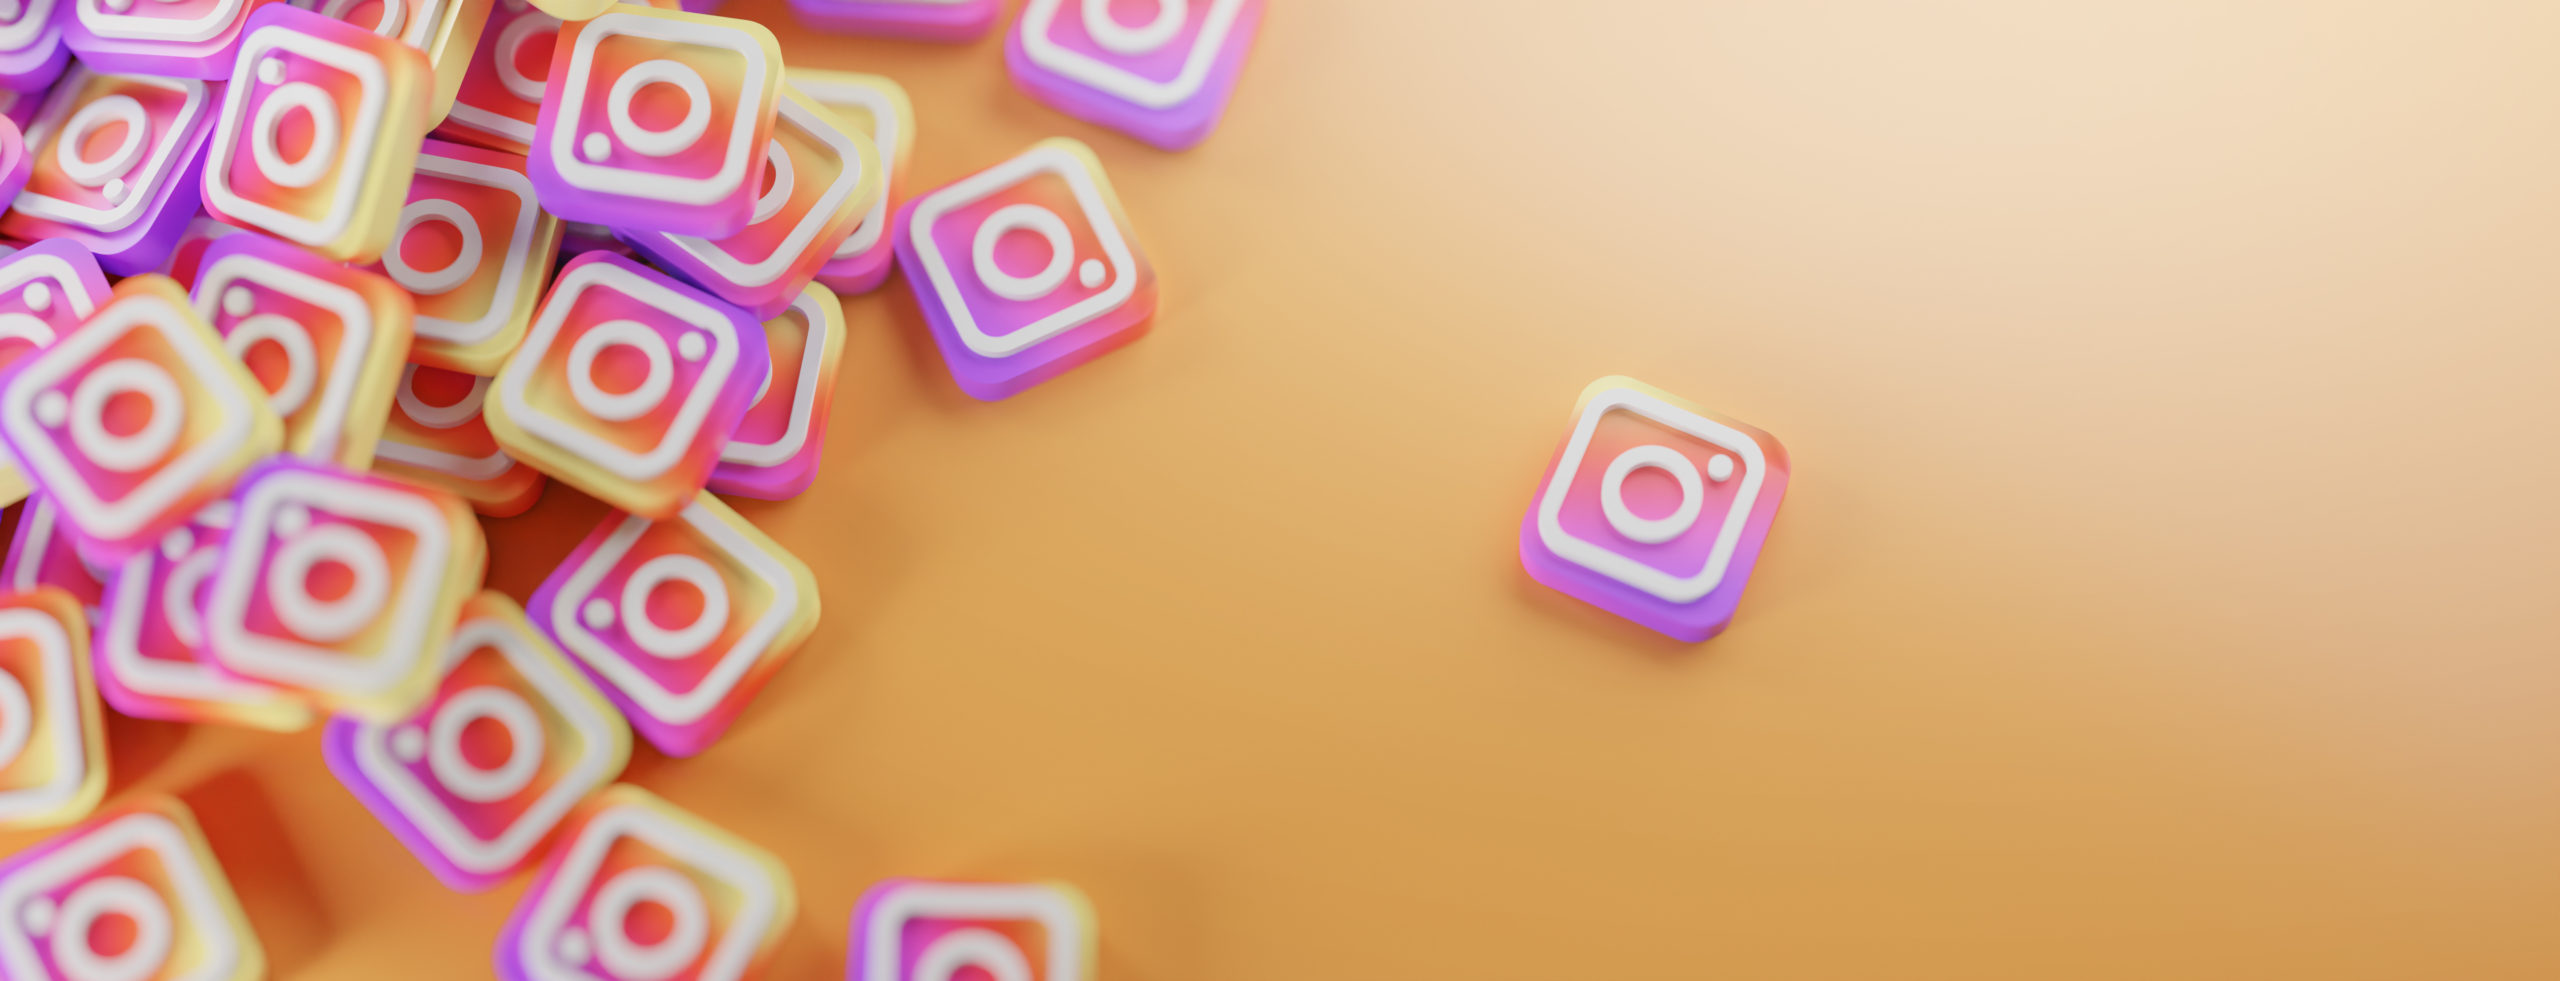 Eight useful apps for Instagram